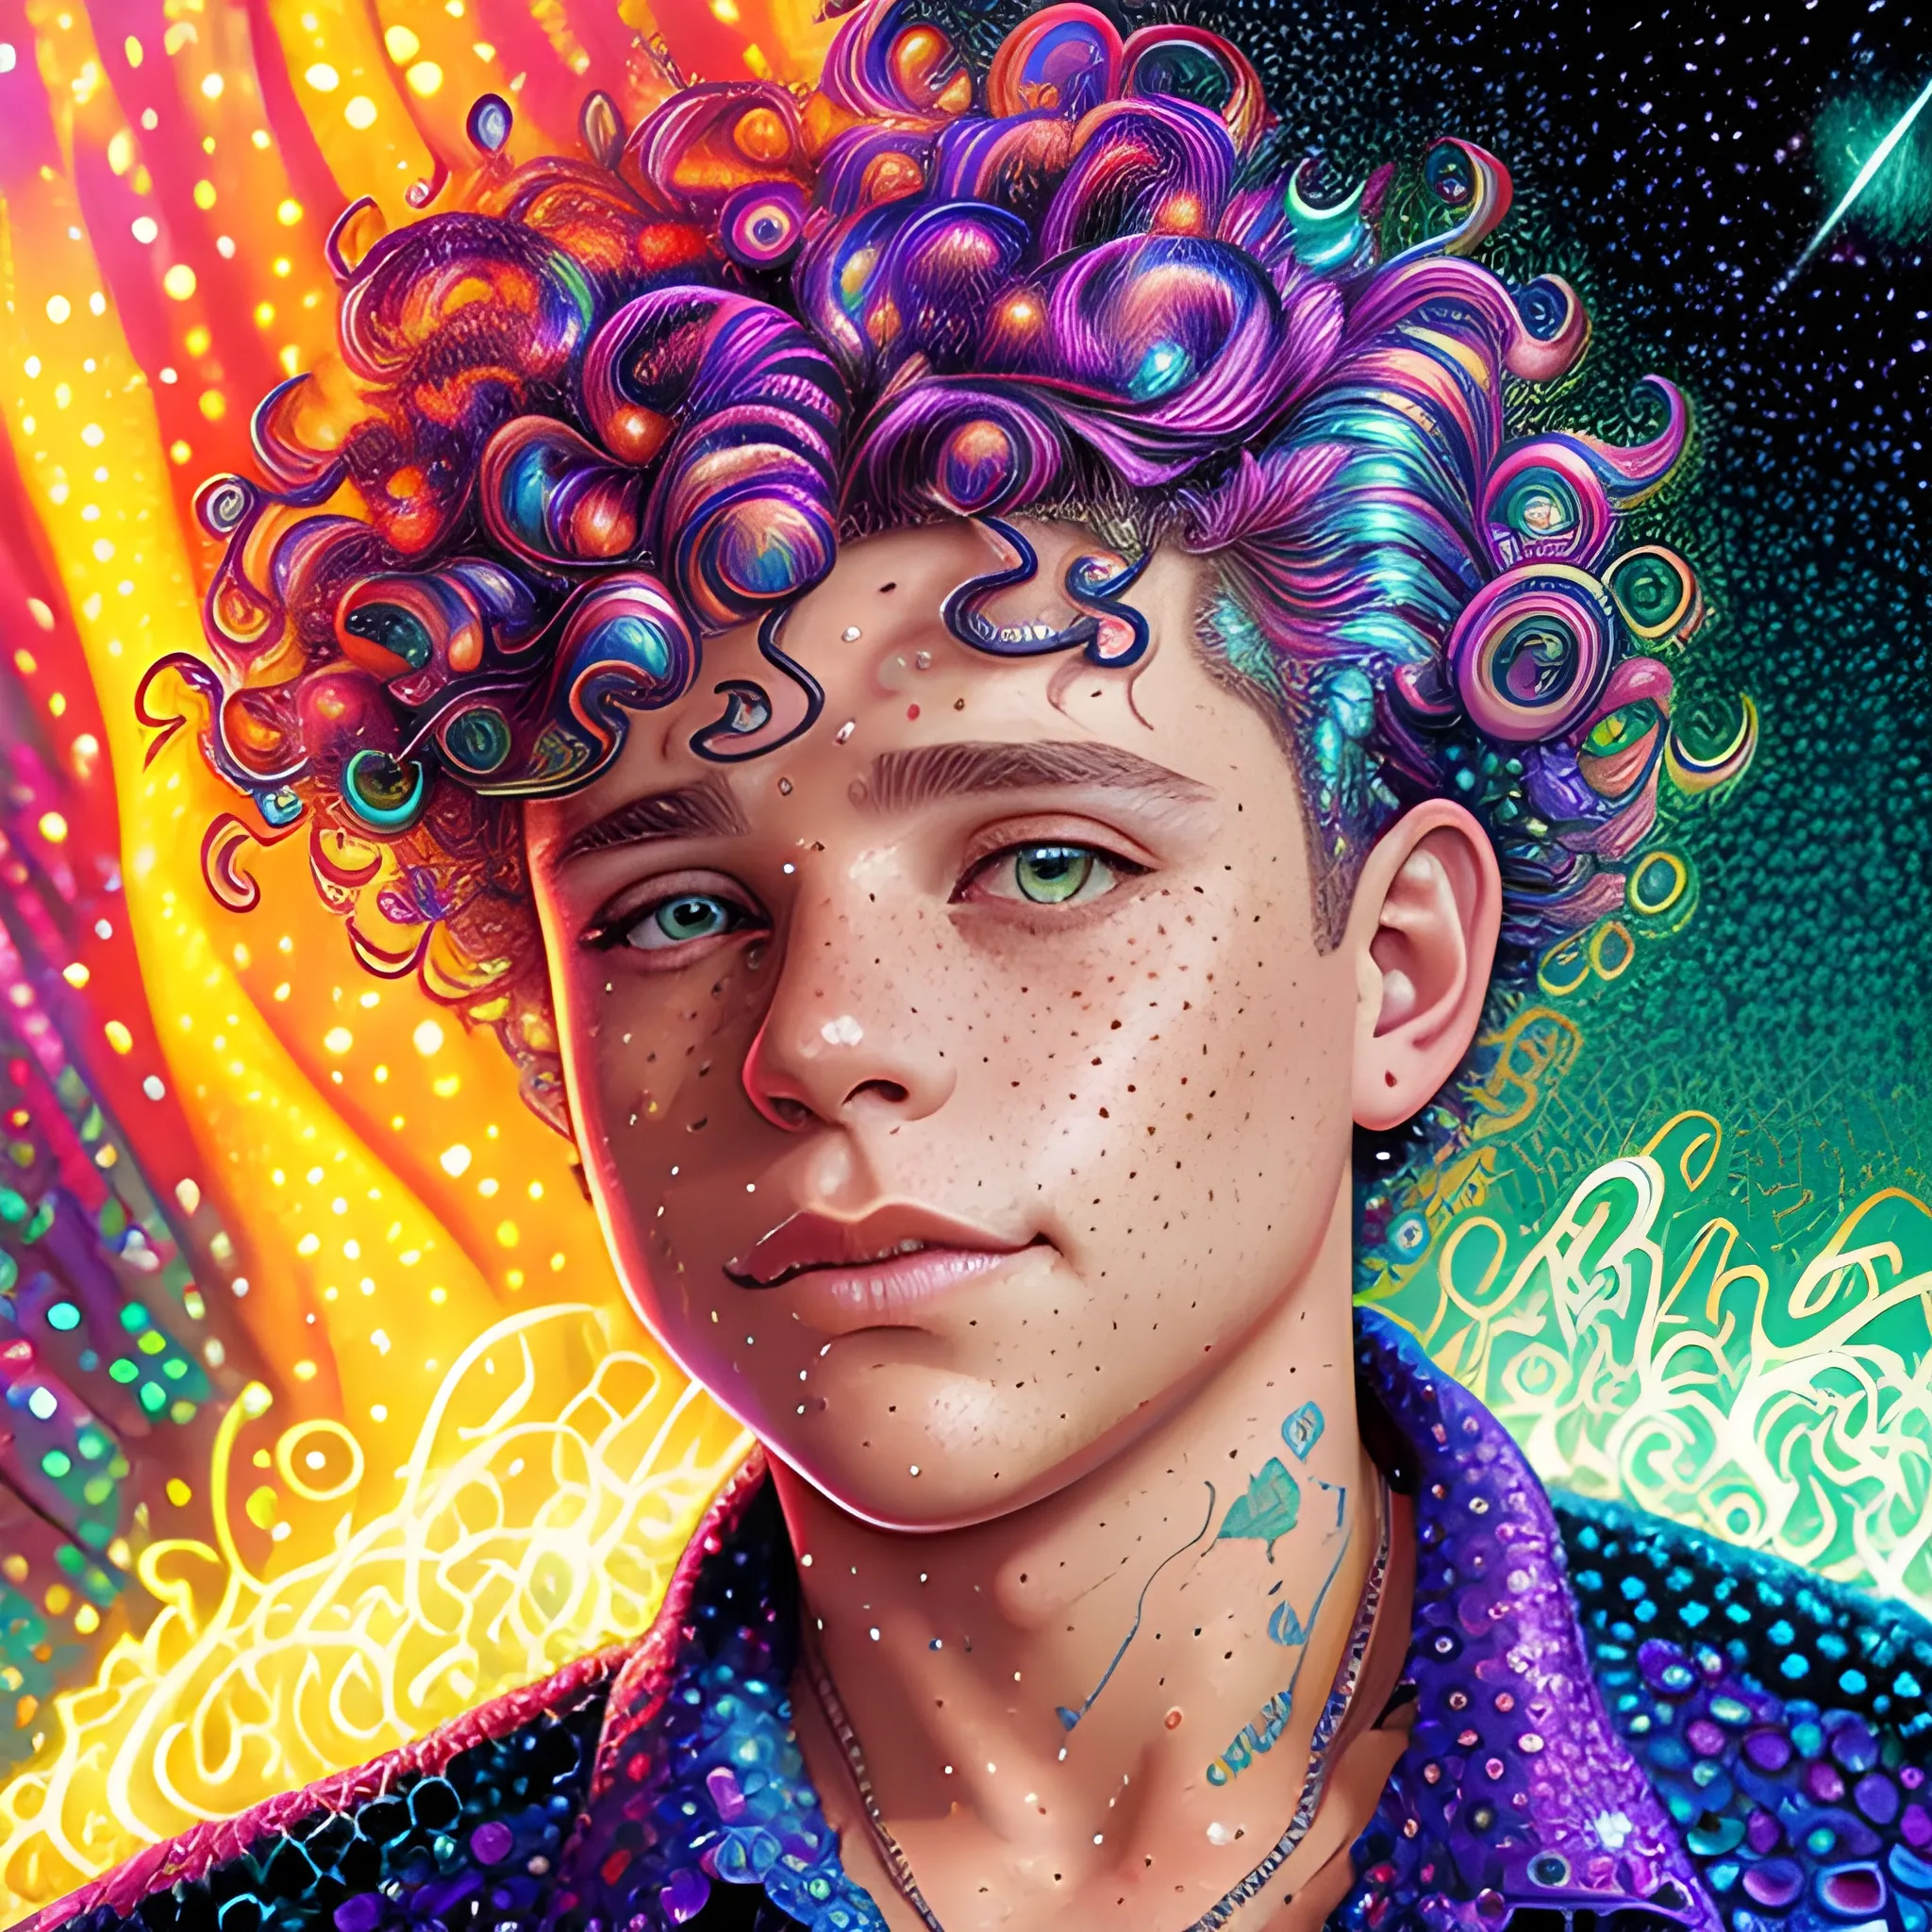 Corey Haim, his highly detailed, softly freckled handsome face, meticulously detailed multi-hued curly hair; by James R. Eads, Fausto-Giurescu, Tania Rivilis, Dan Mumford; luminous colorful sparkles, glitter, airbrush, depth of field, volumetric lighting, rockstar